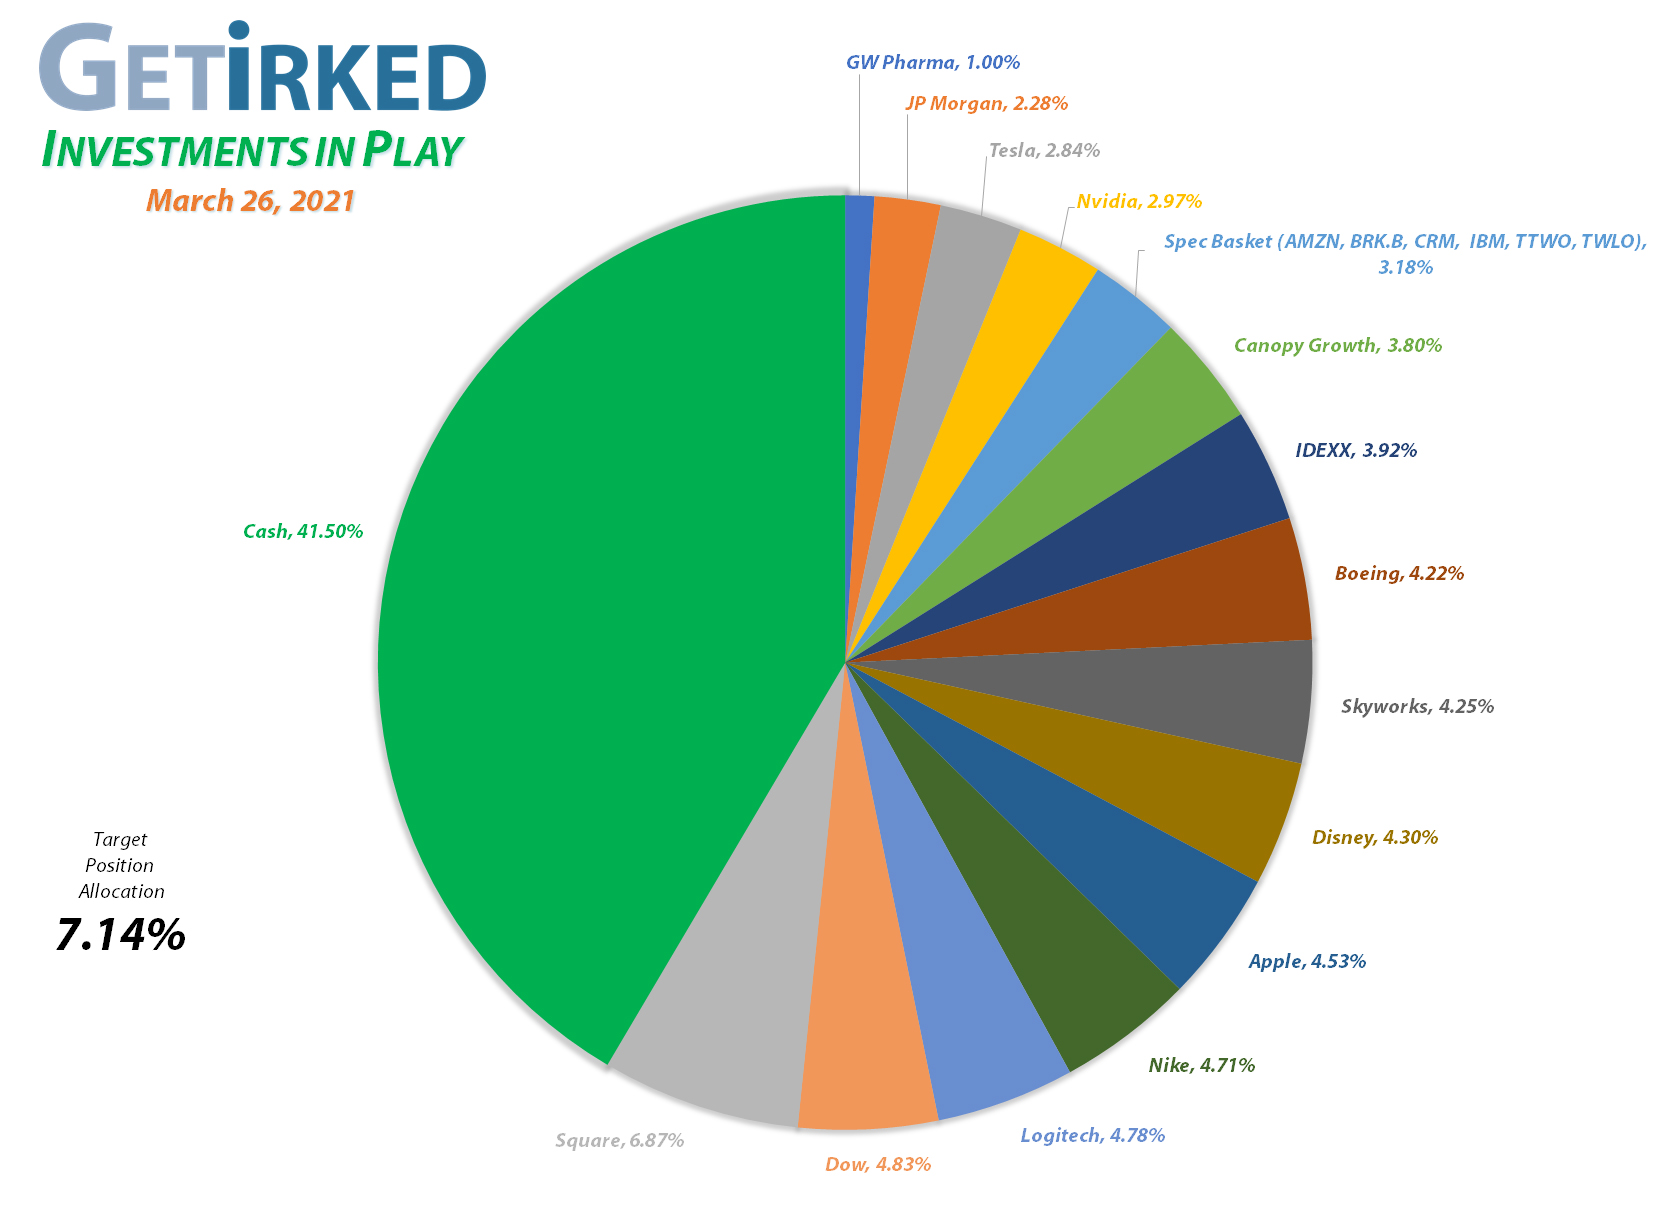 Get Irked - Investments in Play - Current Holdings - March 12, 2021et Irked's Pandemic Portfolio Holdings as of March 26, 2021